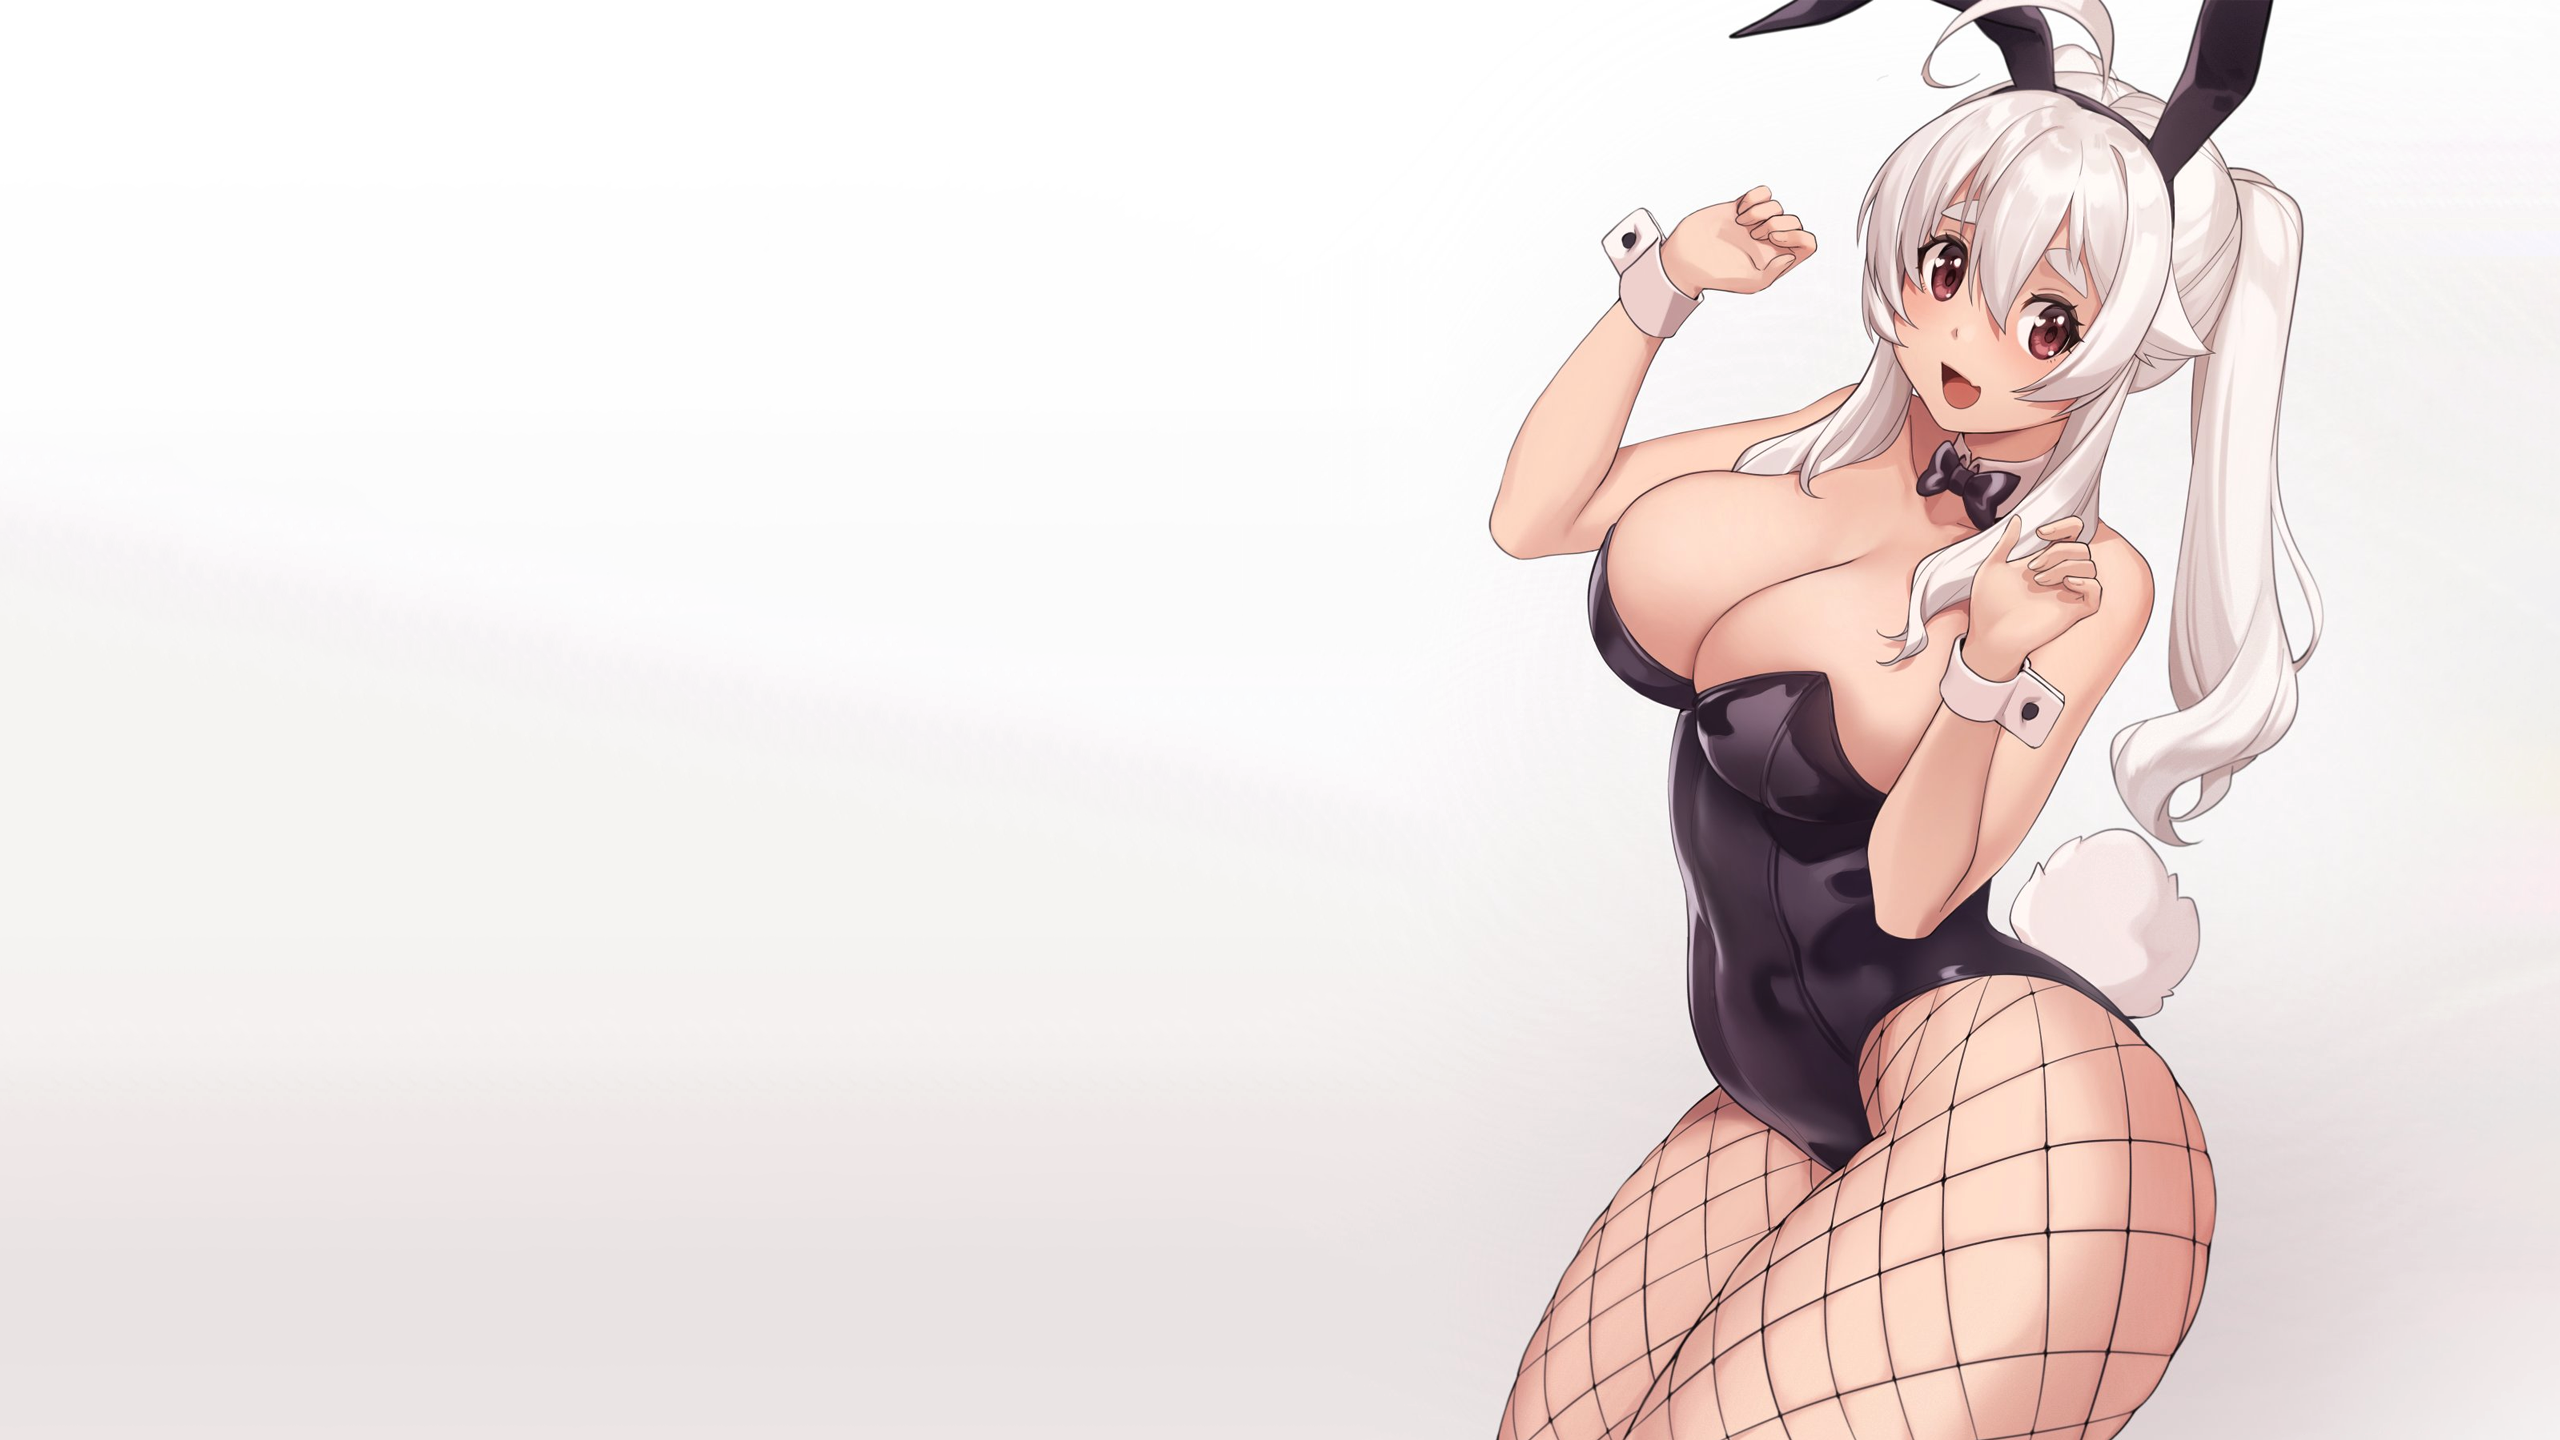 Anime 2560x1440 anime anime girls ecchi simple background bunny girl bunny ears animal ears bunny suit bodysuit leotard black leotard black bodysuit big boobs boobs huge breasts cleavage no bra pantyhose fishnet fishnet pantyhose thighs thick thigh ponytail Iwbitu-sa minimalism bunny tail bow tie